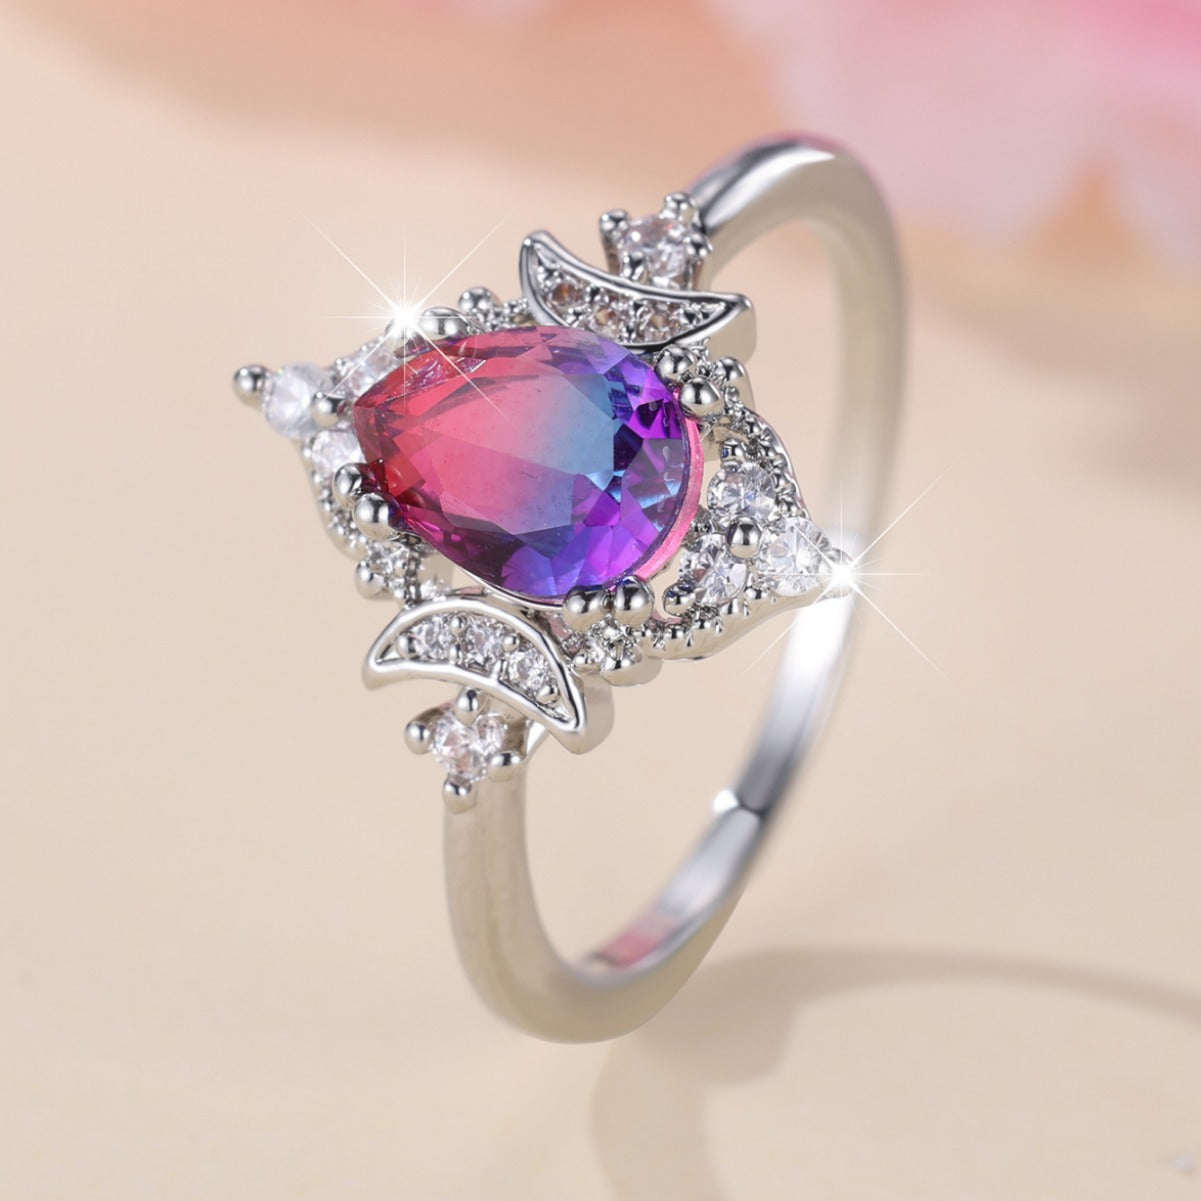 New Gradient White K Rose Blue Water Drop Tourmaline Crown Ring Personality Fashion